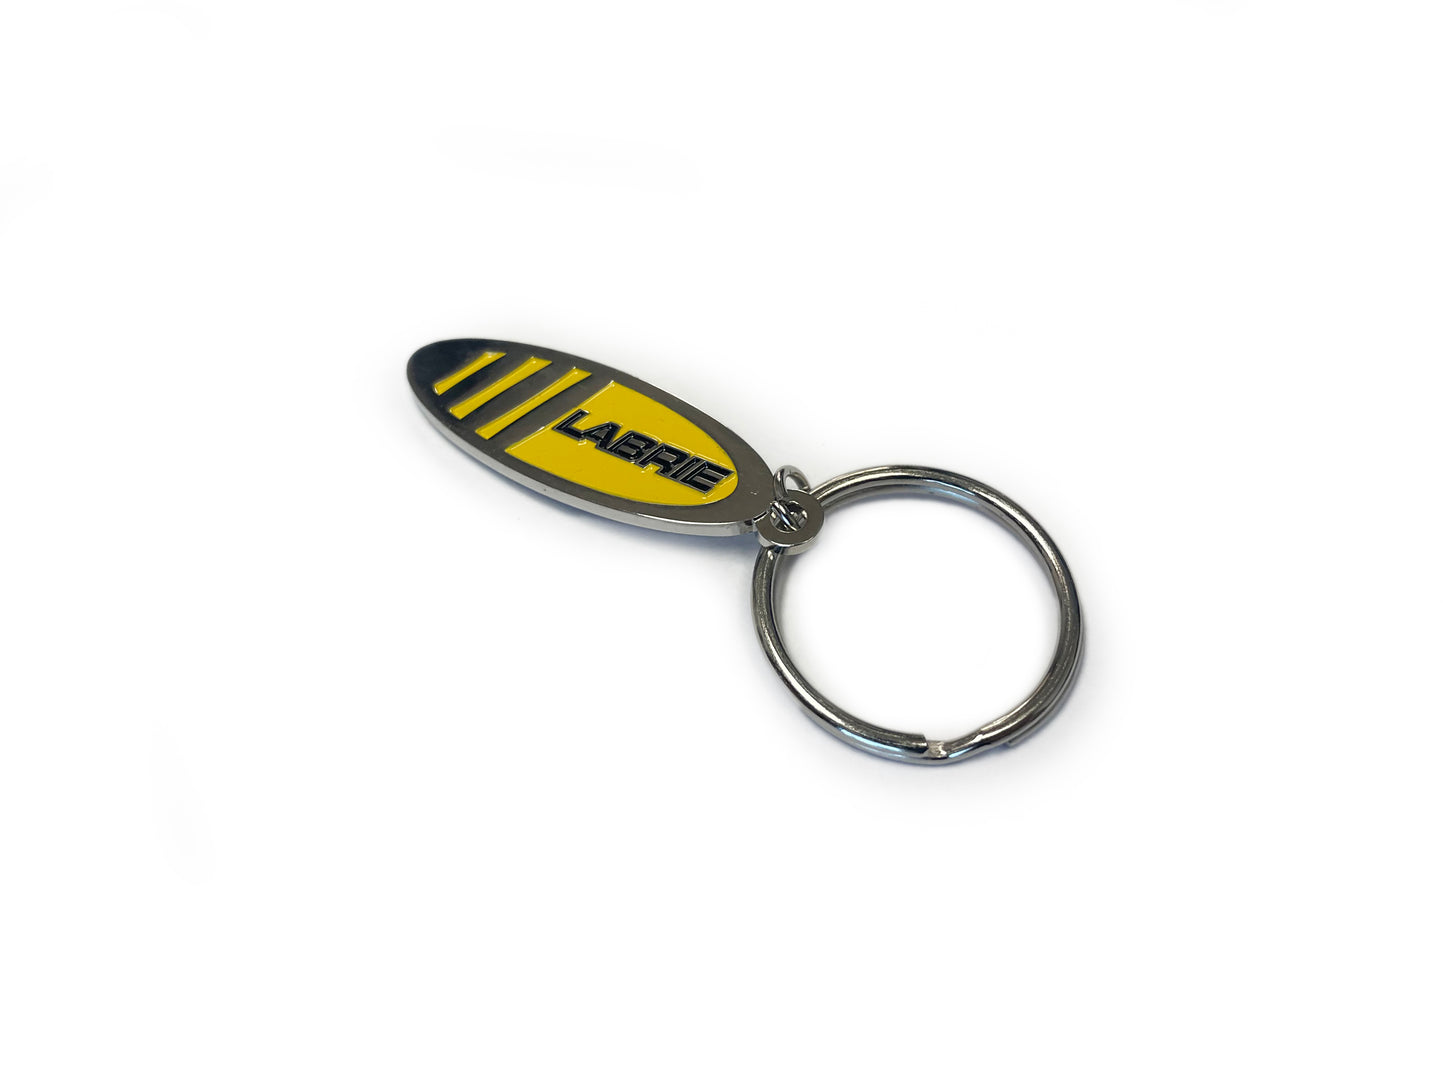 Labrie Truck Brand Key Chains